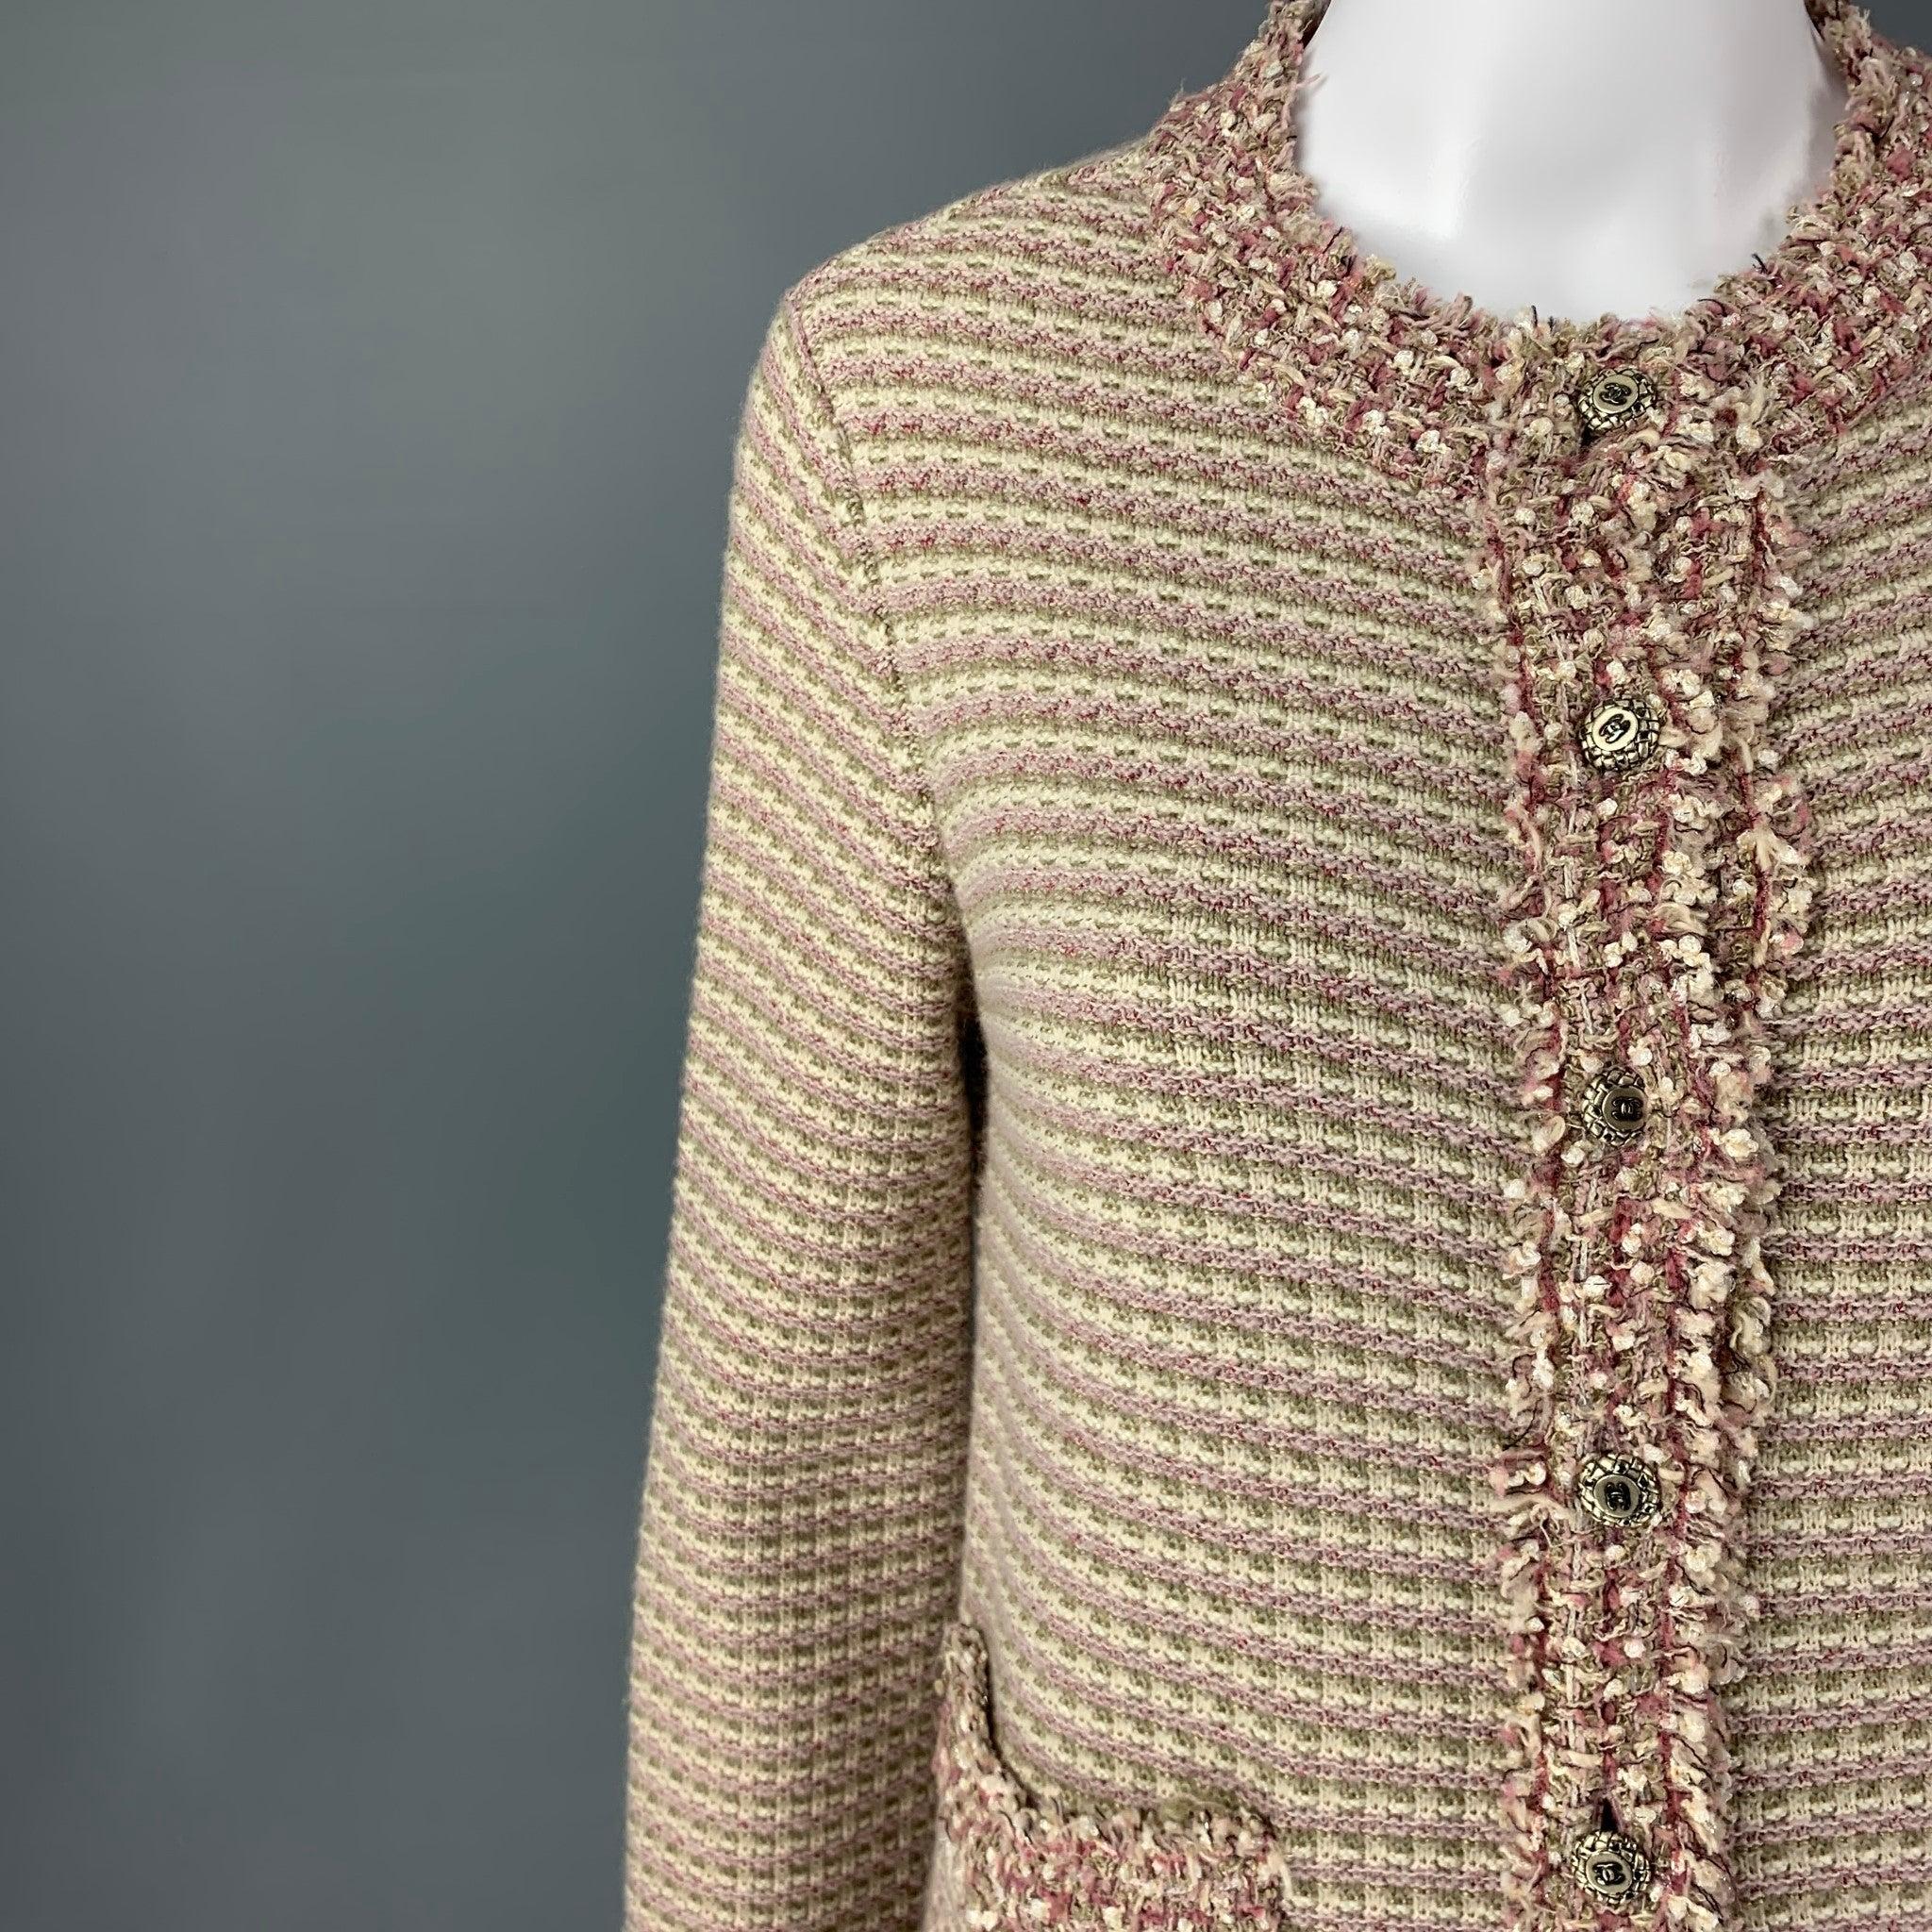 CHANEL cardigan comes in a pink & cream textured knitted cashmere blend featuring silver tone logo buttons, front pockets, long sleeves, and a buttoned closure. Made in Italy.
Excellent
Pre-Owned Condition. 

Marked:   06C B2944 38 

Measurements: 
